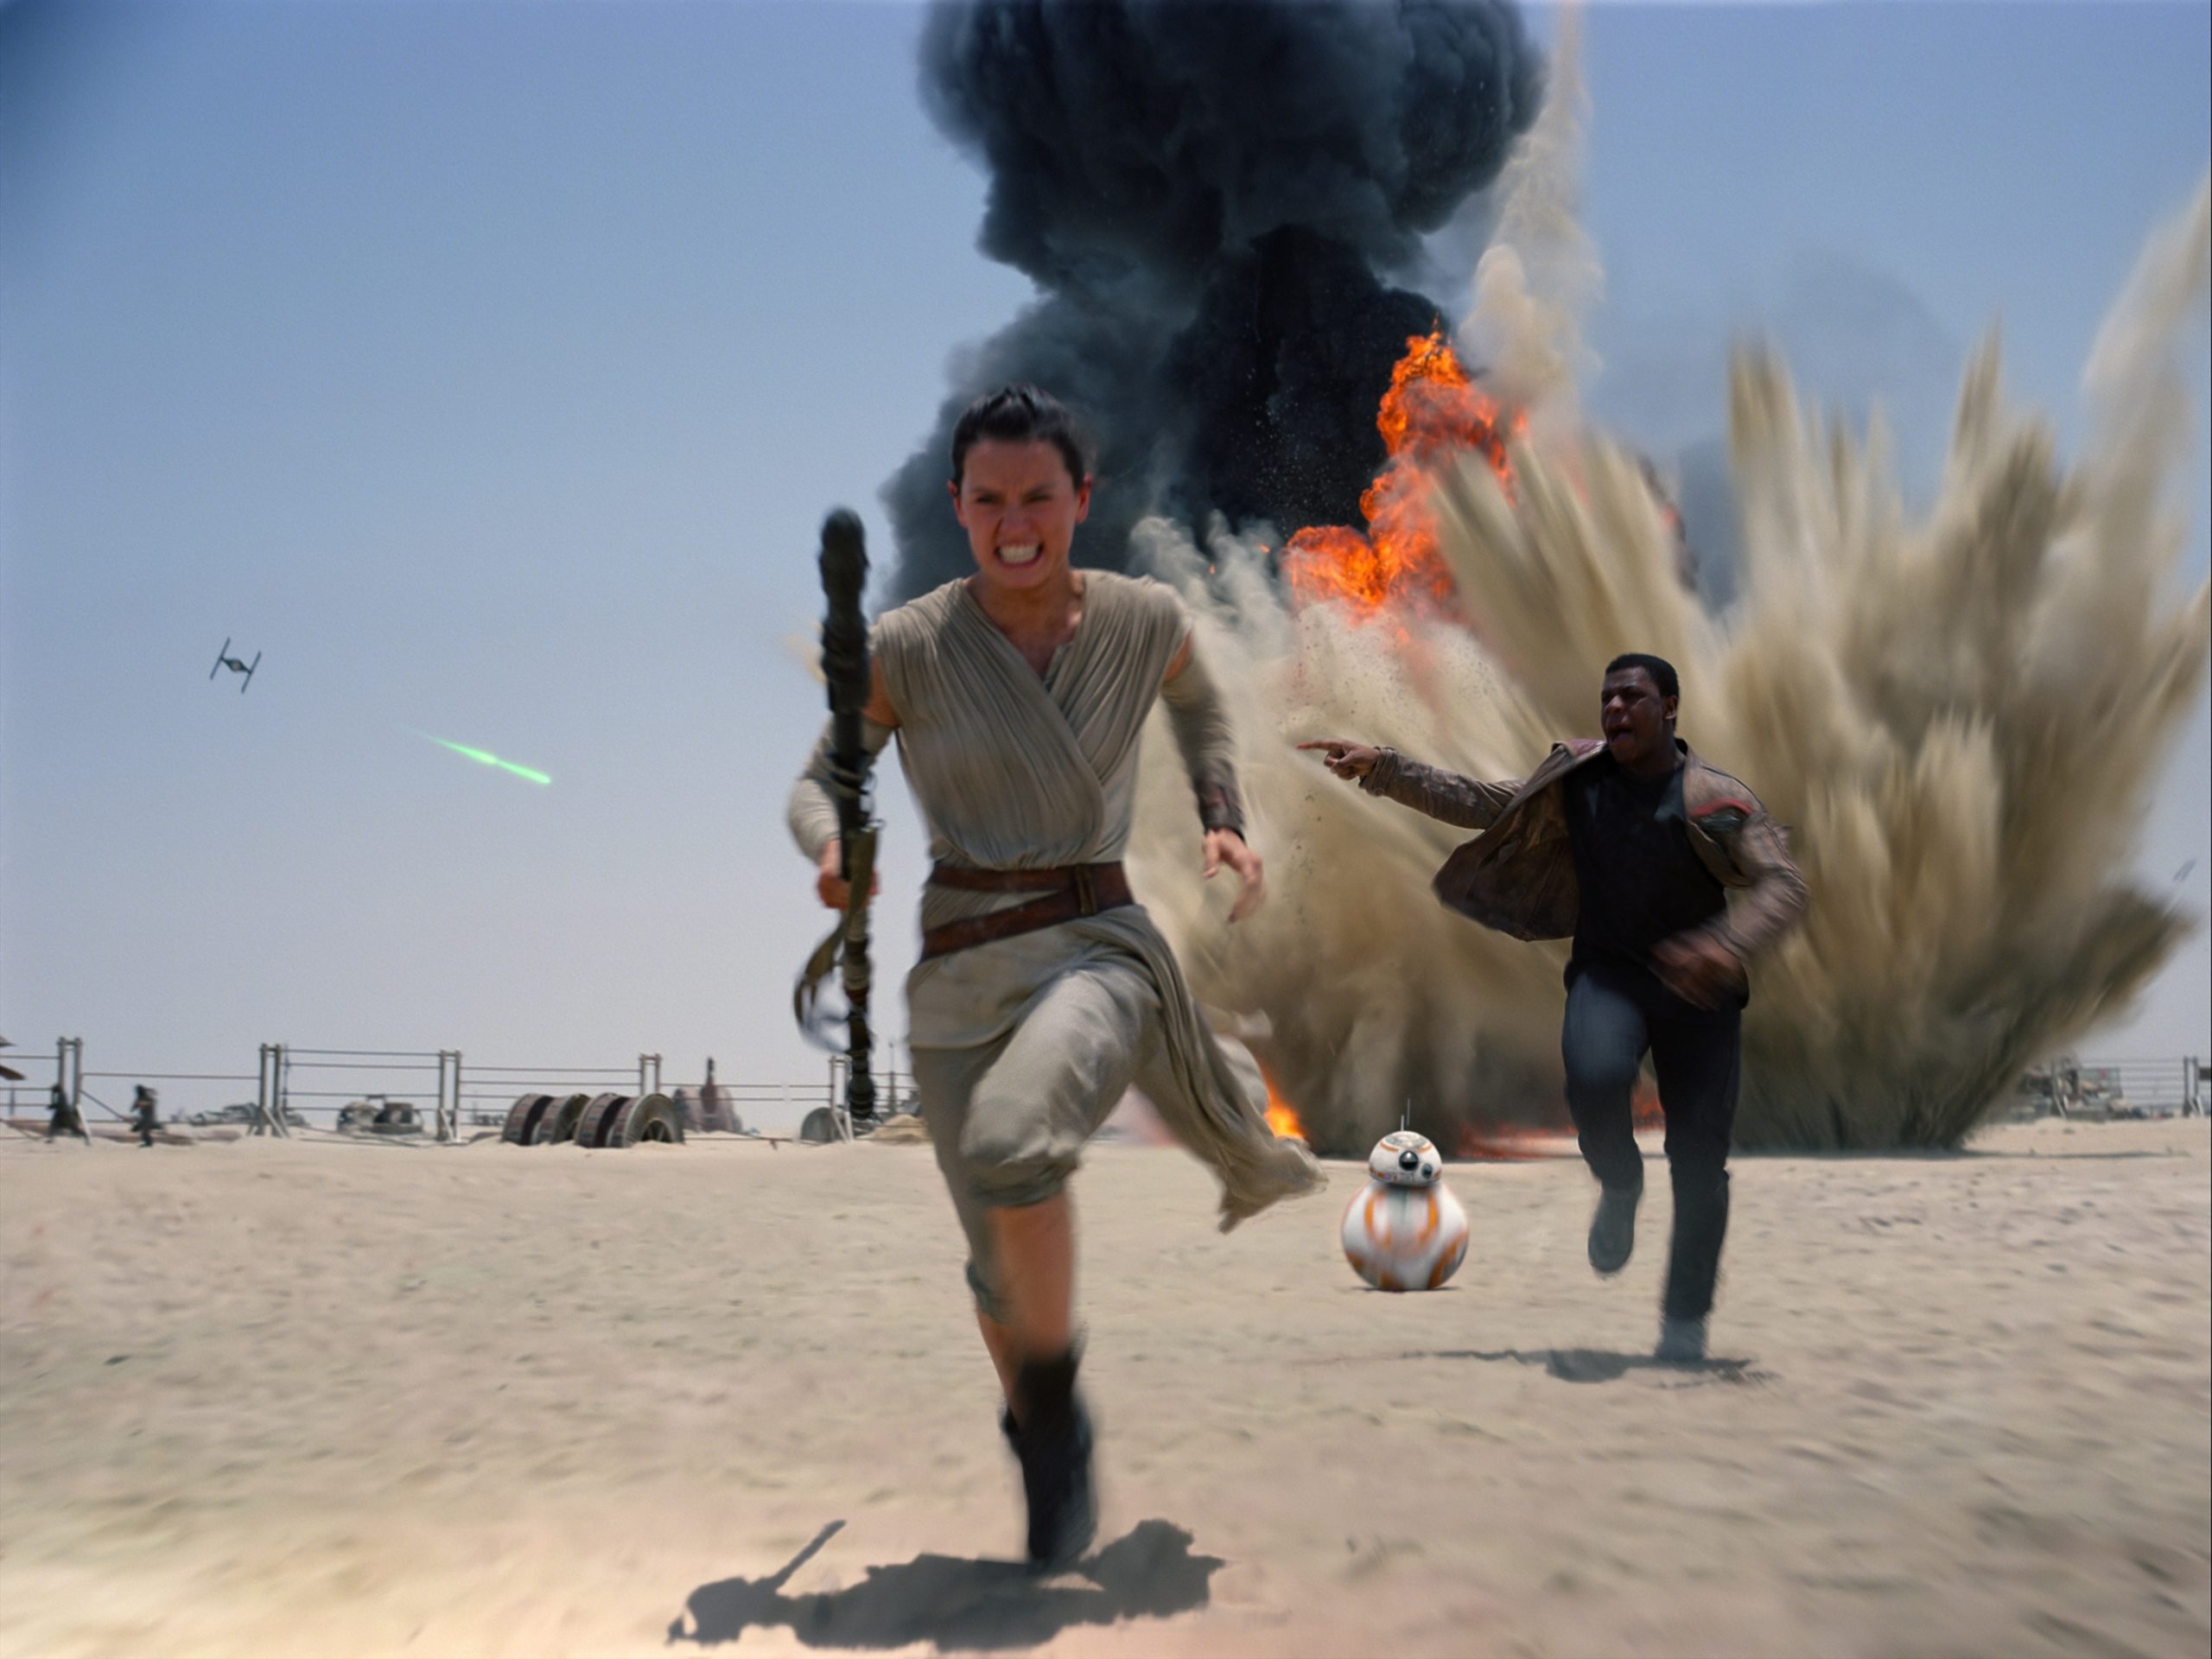 STAR WARS: THE FORCE AWAKENS, (aka STAR WARS: EPISODE VII - THE FORCE AWAKENS), from left: Daisy